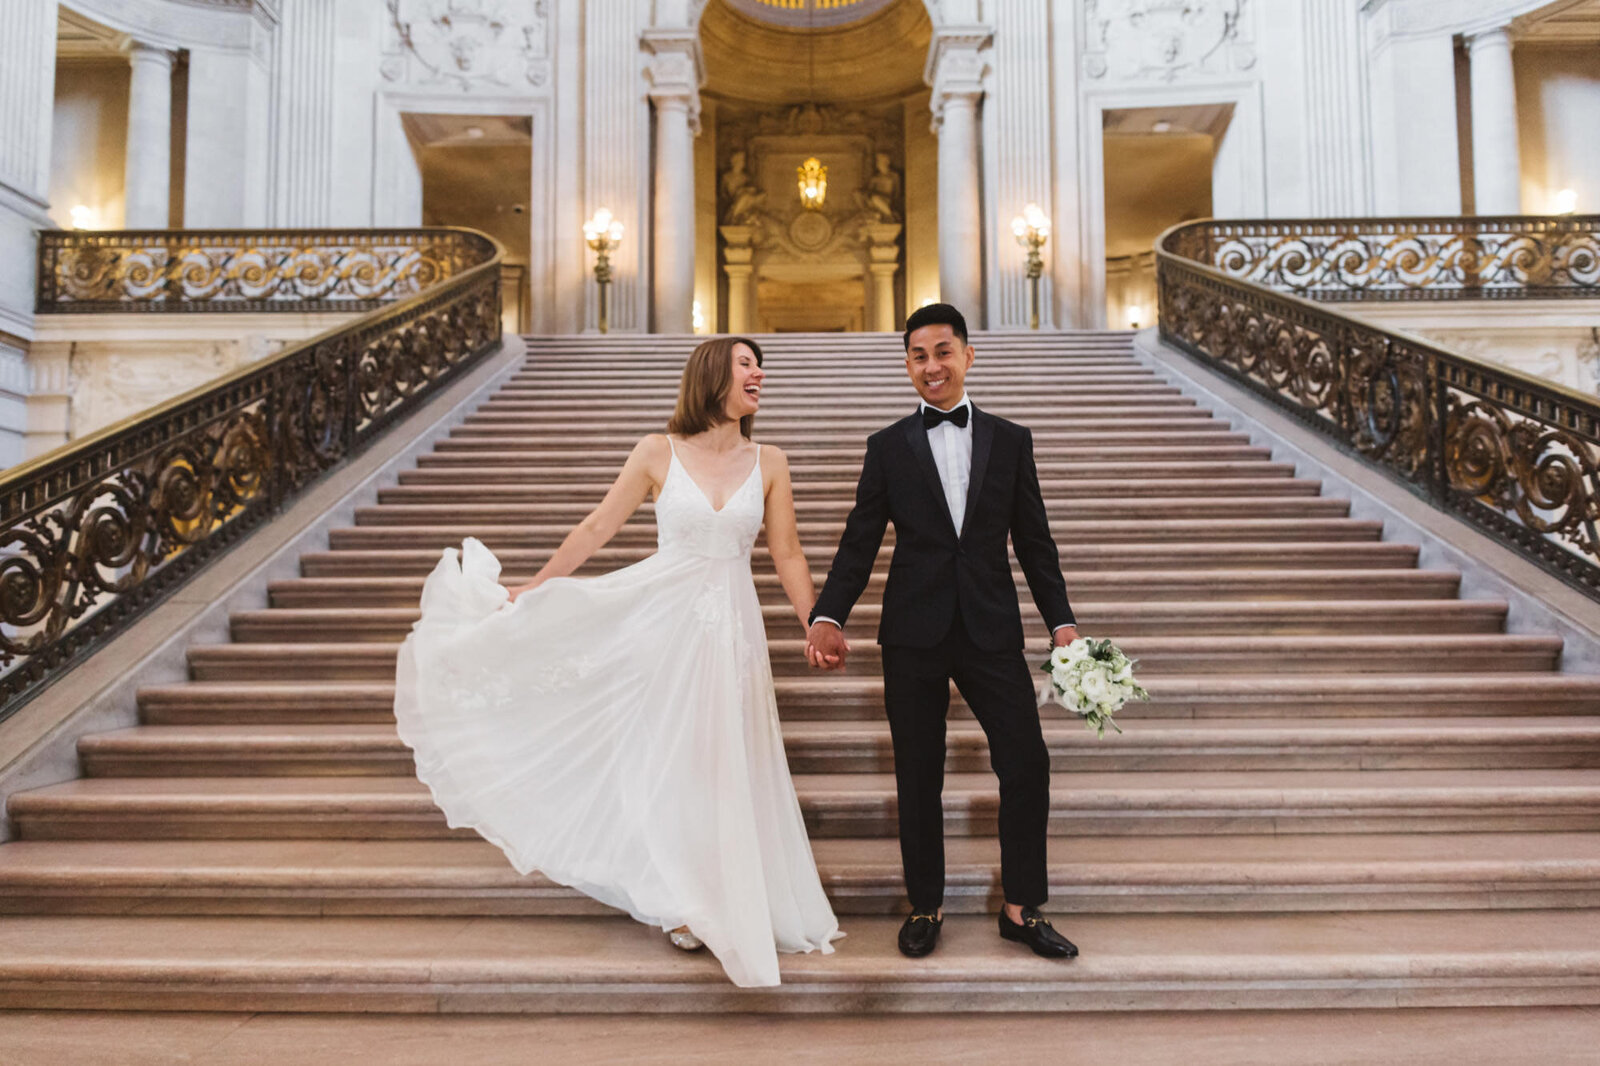 joyful and natural Grand Staircase shots of bride and groom